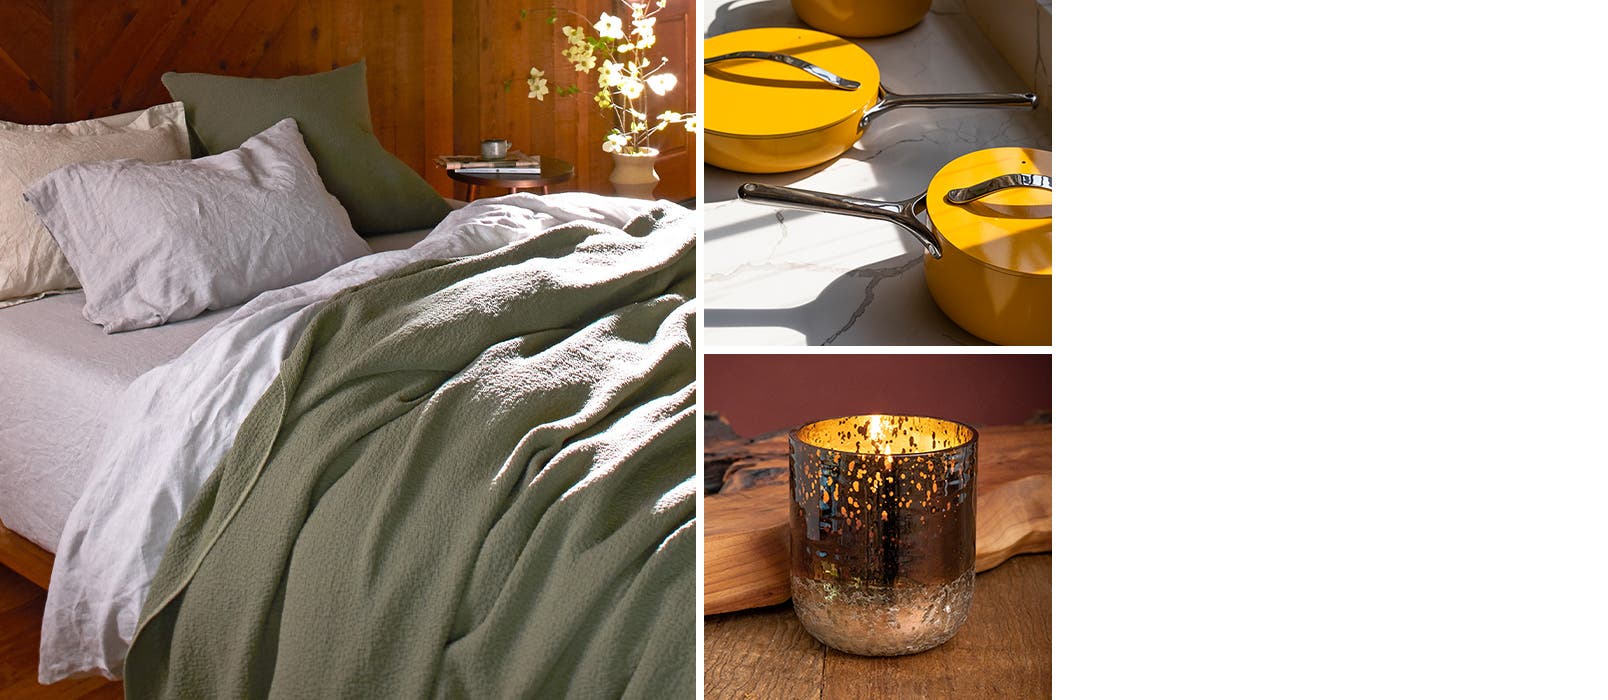 Coyuchi bedding, CARAWAY cookware and ILLUME candle.